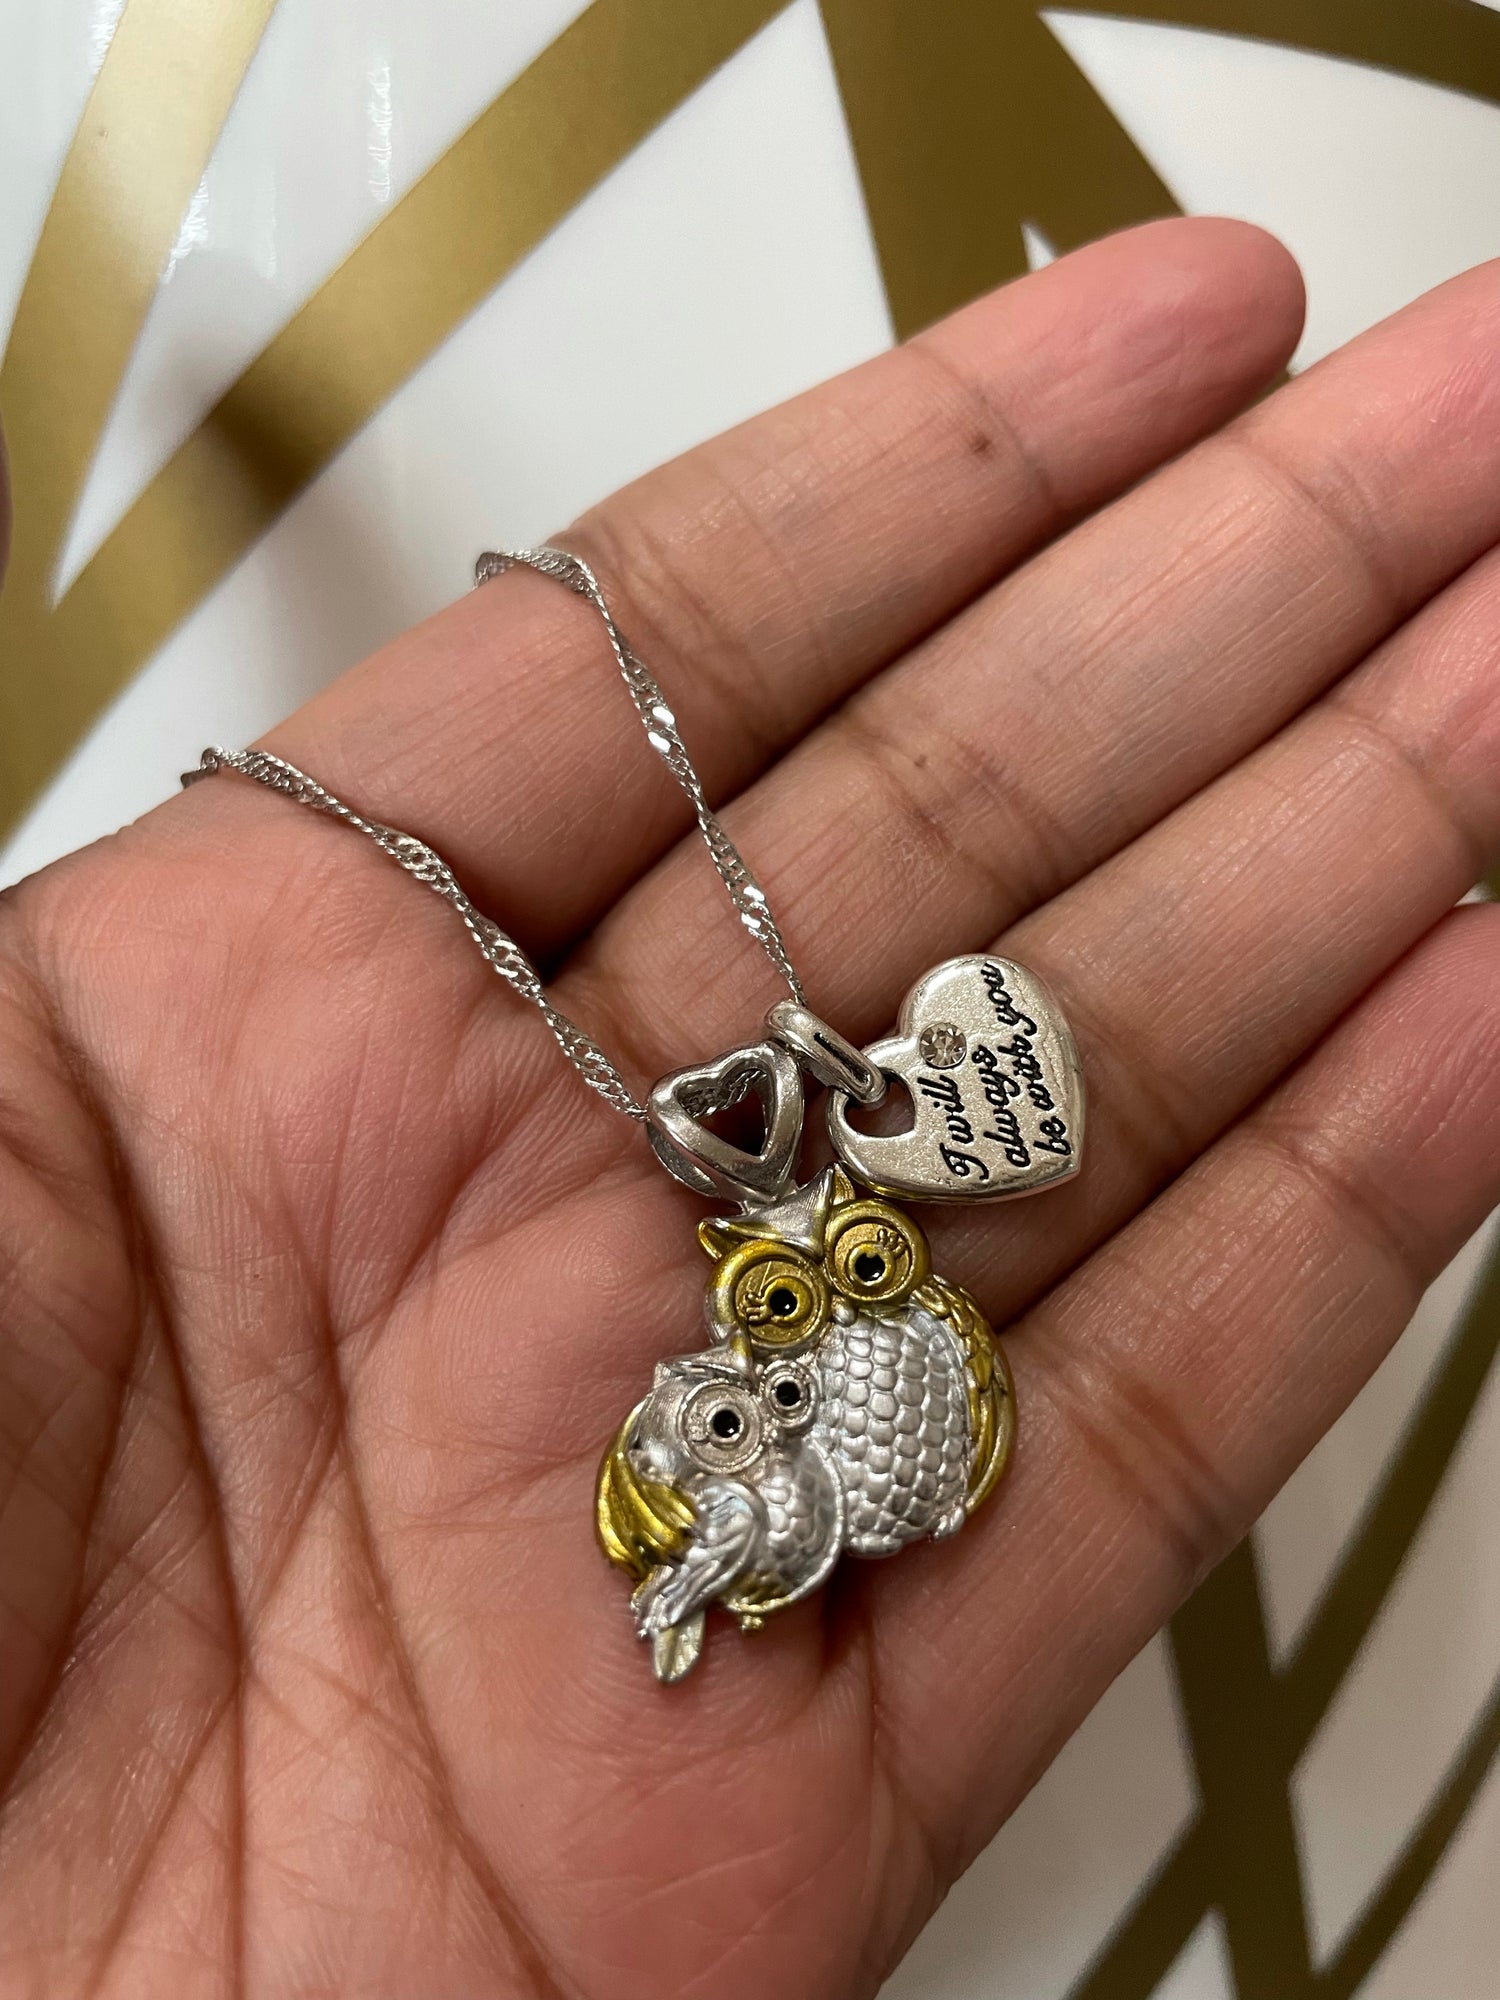 Owl charm necklace pendant love family gift 2 tone jewelry